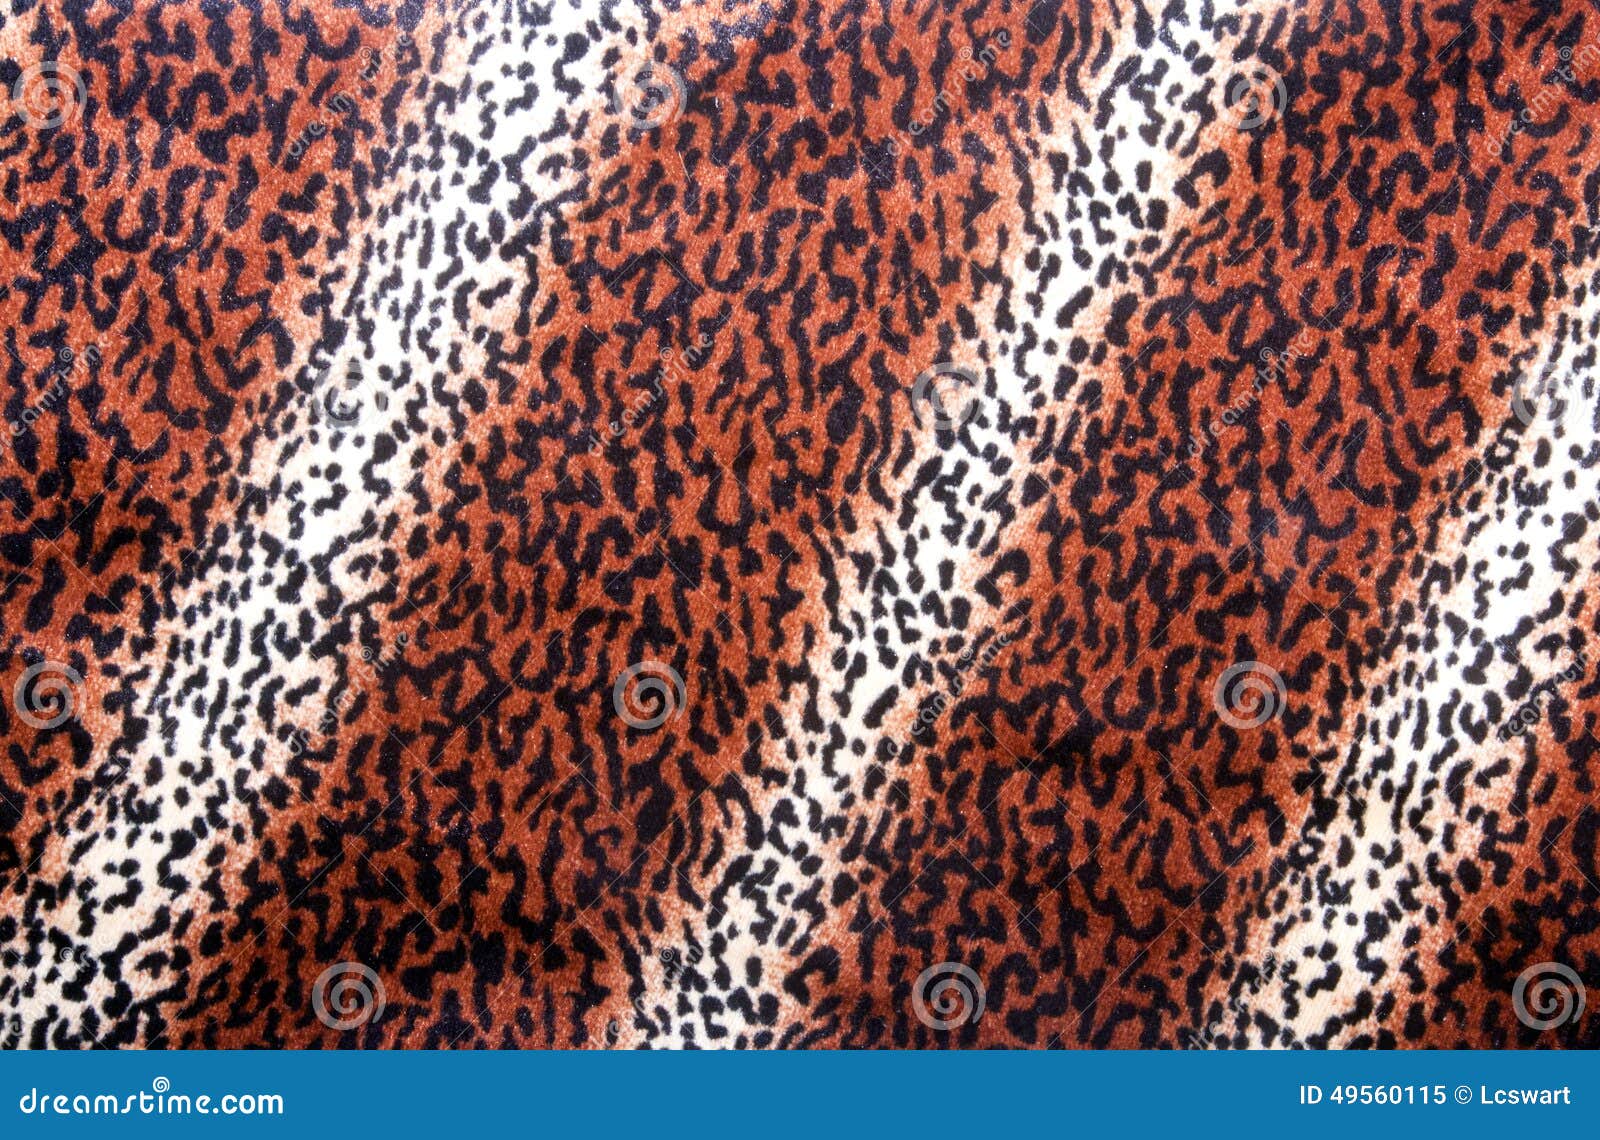 Leopard Skin Pattern on Faux Fur Fabric Stock Image - Image of nature,  imitation: 49560115